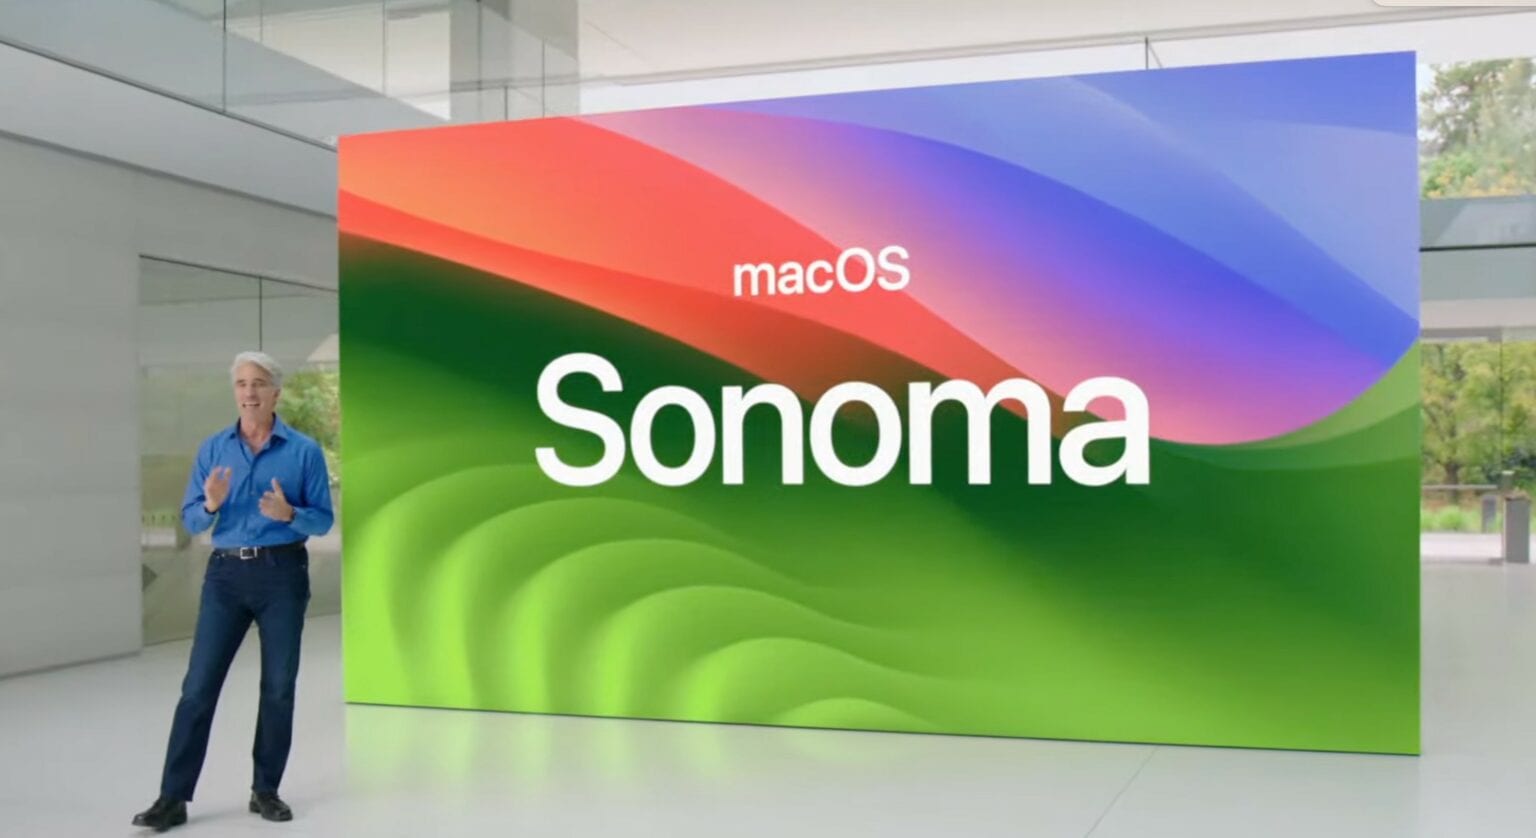 Apple software chief Craig Federighi laid out what's new in macOS Sonoma.